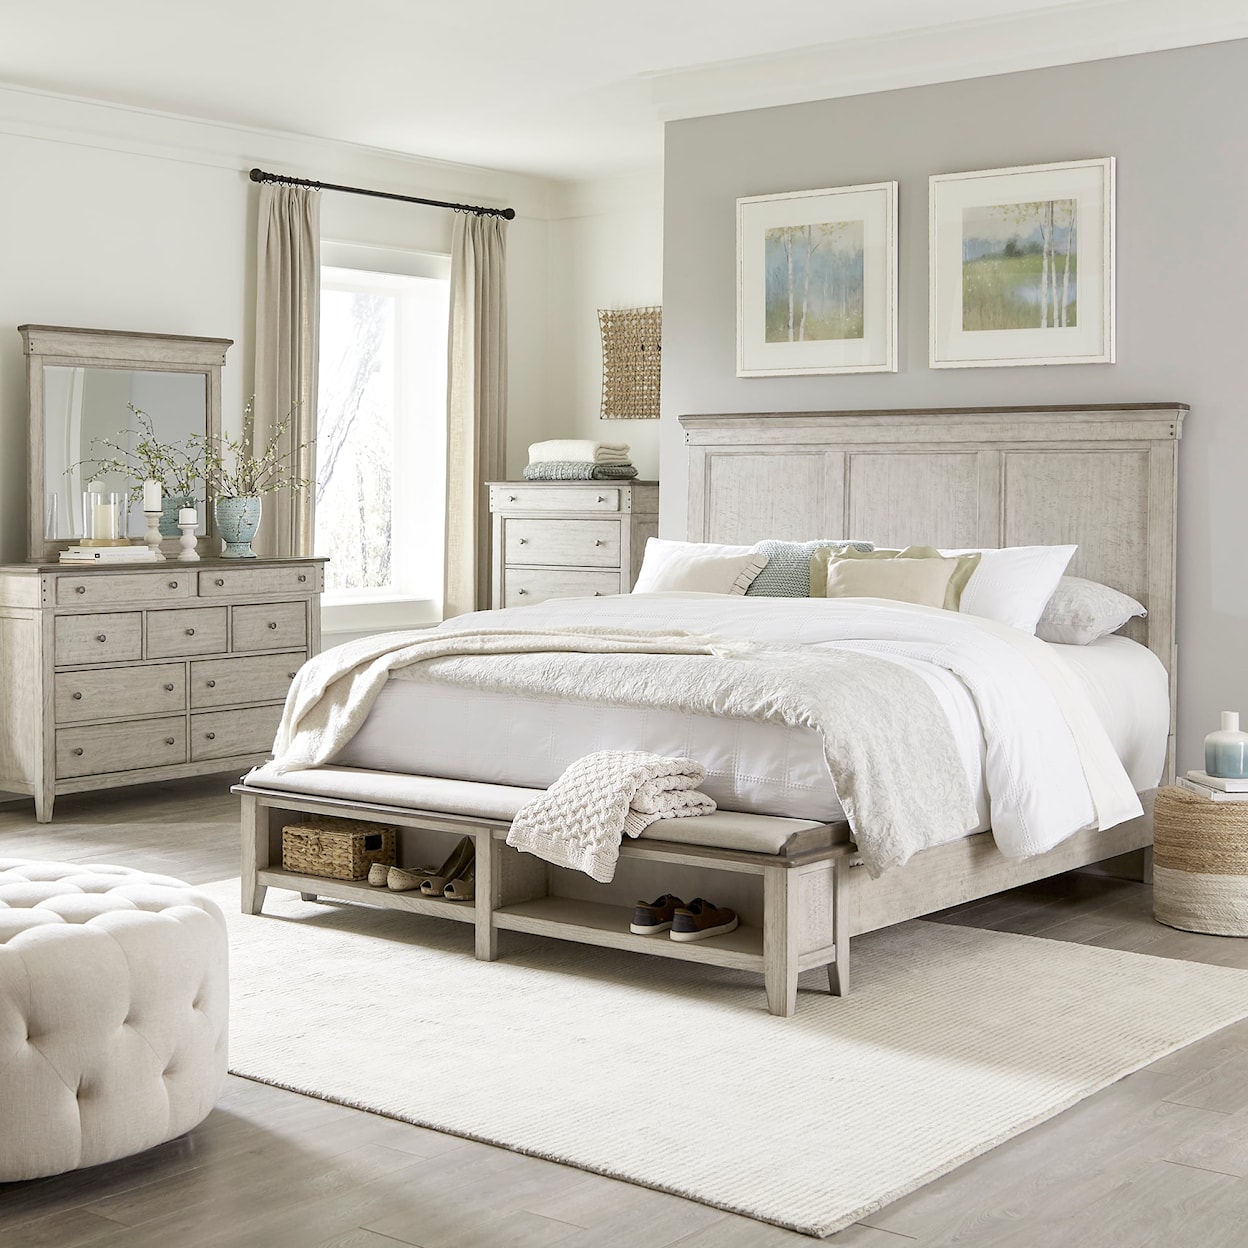 Libby Ivy Hollow 4-Piece King Storage Bedroom Set